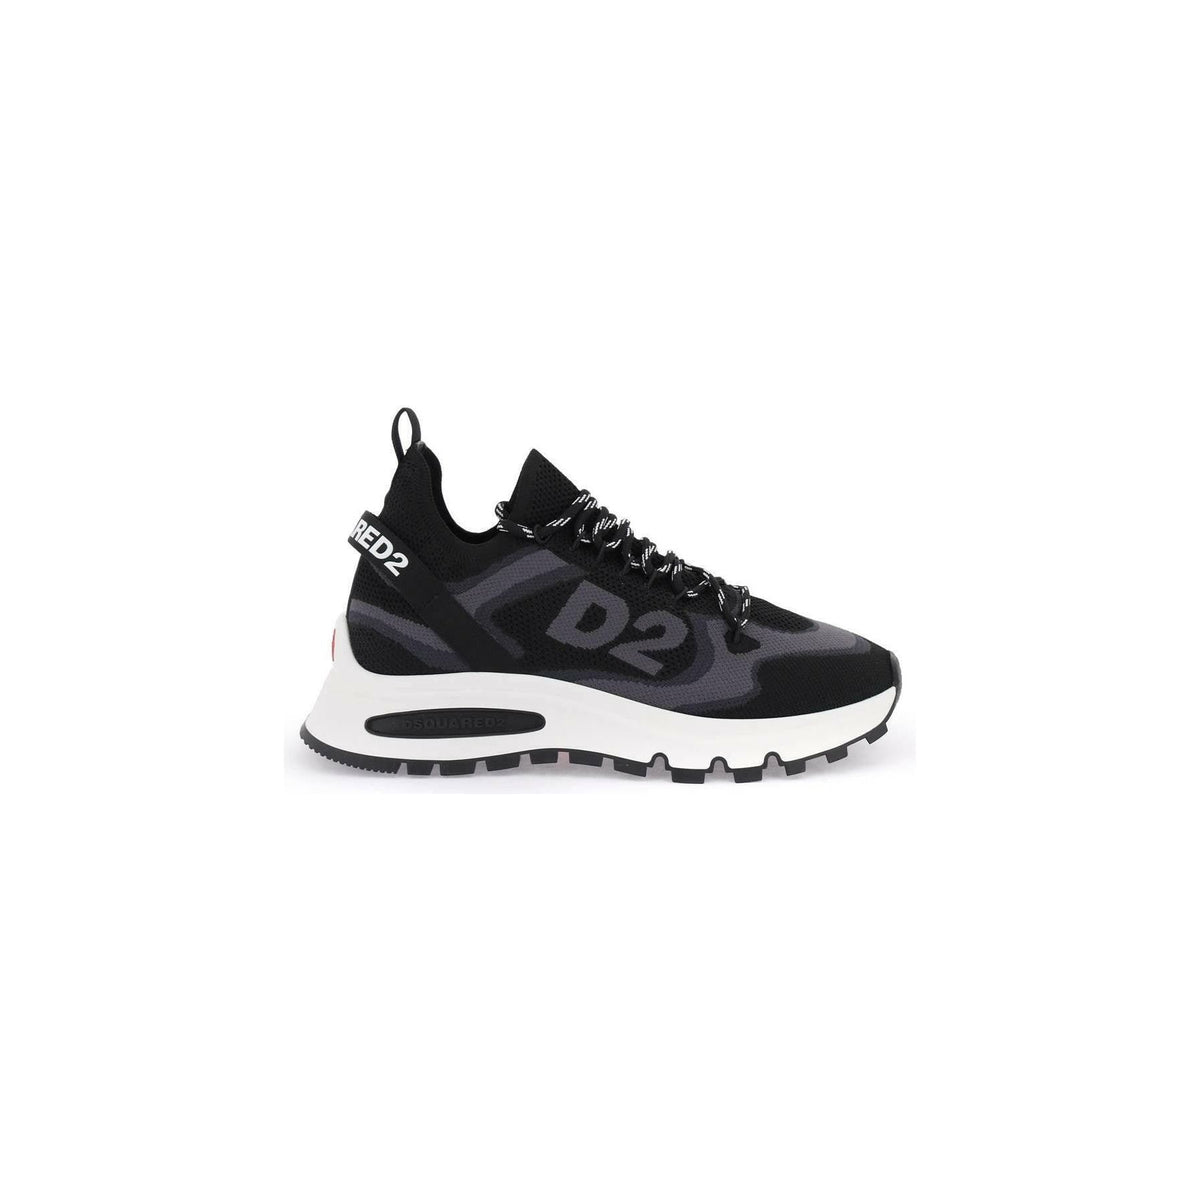 Black Recycled Fabric Run Ds2 Sneakers With Jacquard Logo DSQUARED2 JOHN JULIA.